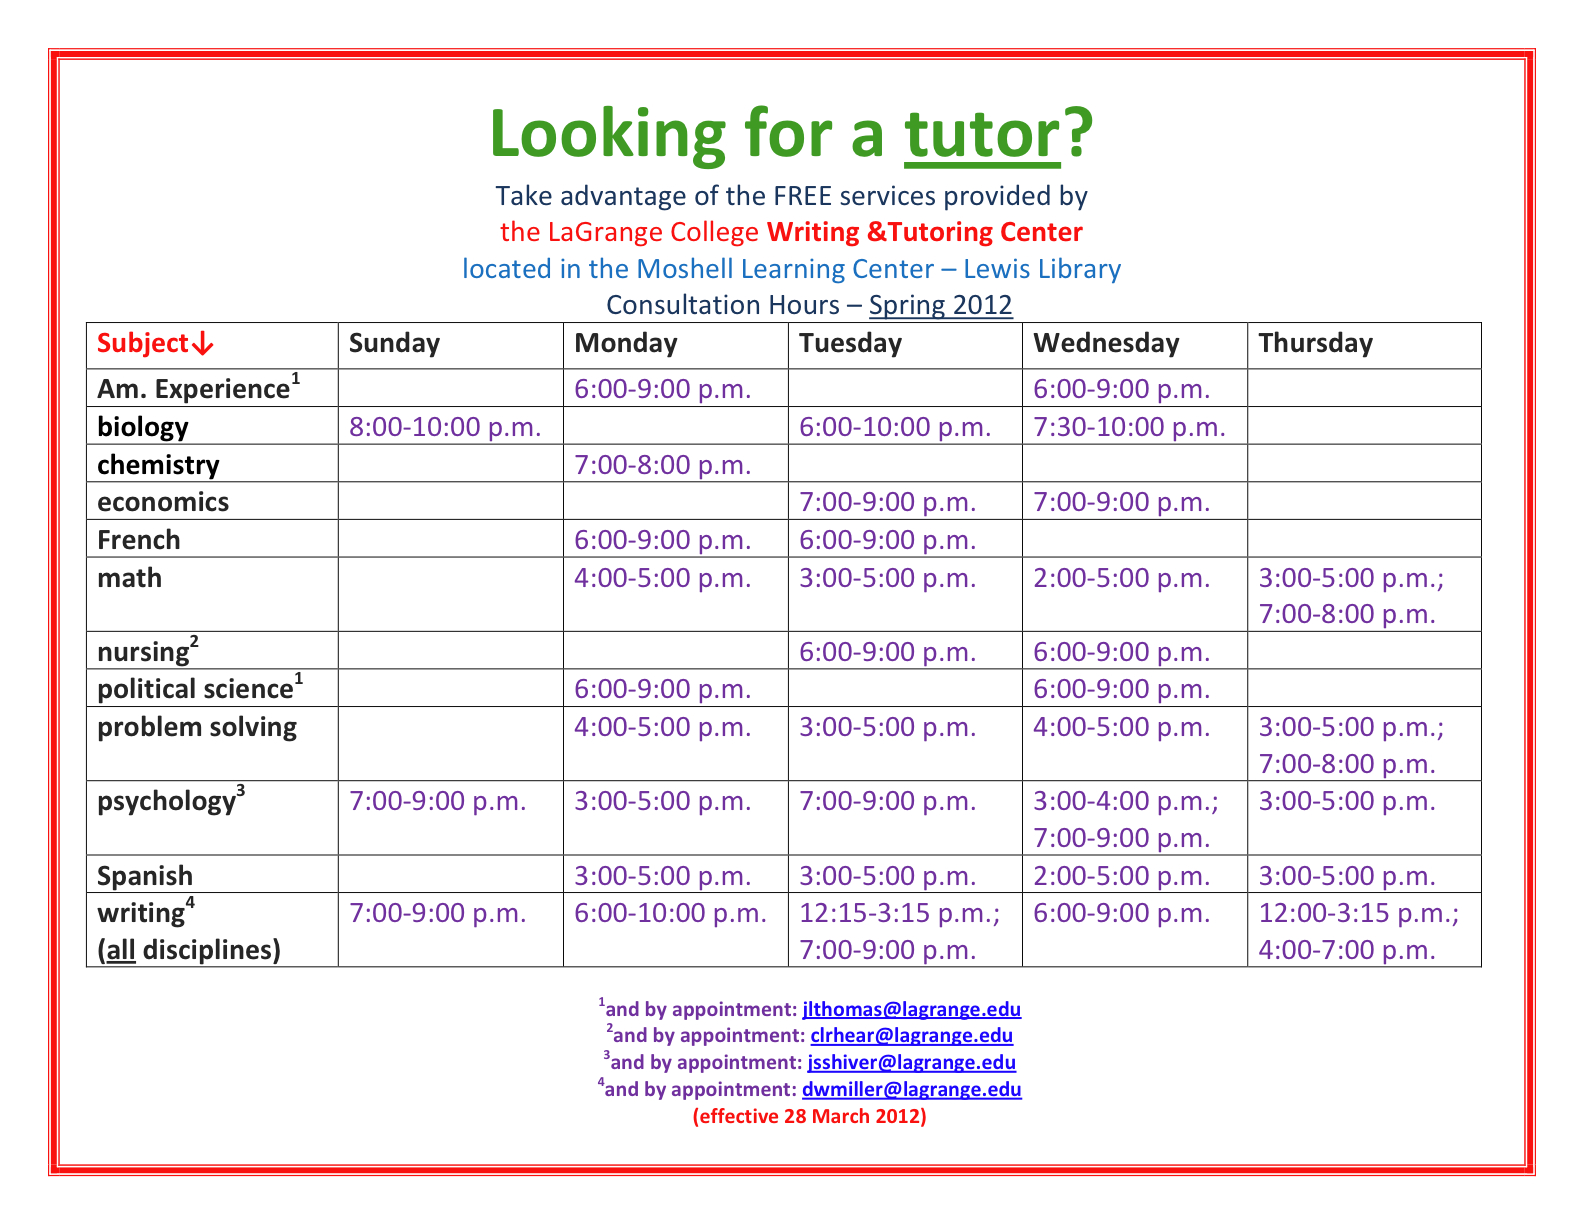 frank-and-laura-lewis-library-blog-writing-tutoring-center-spring